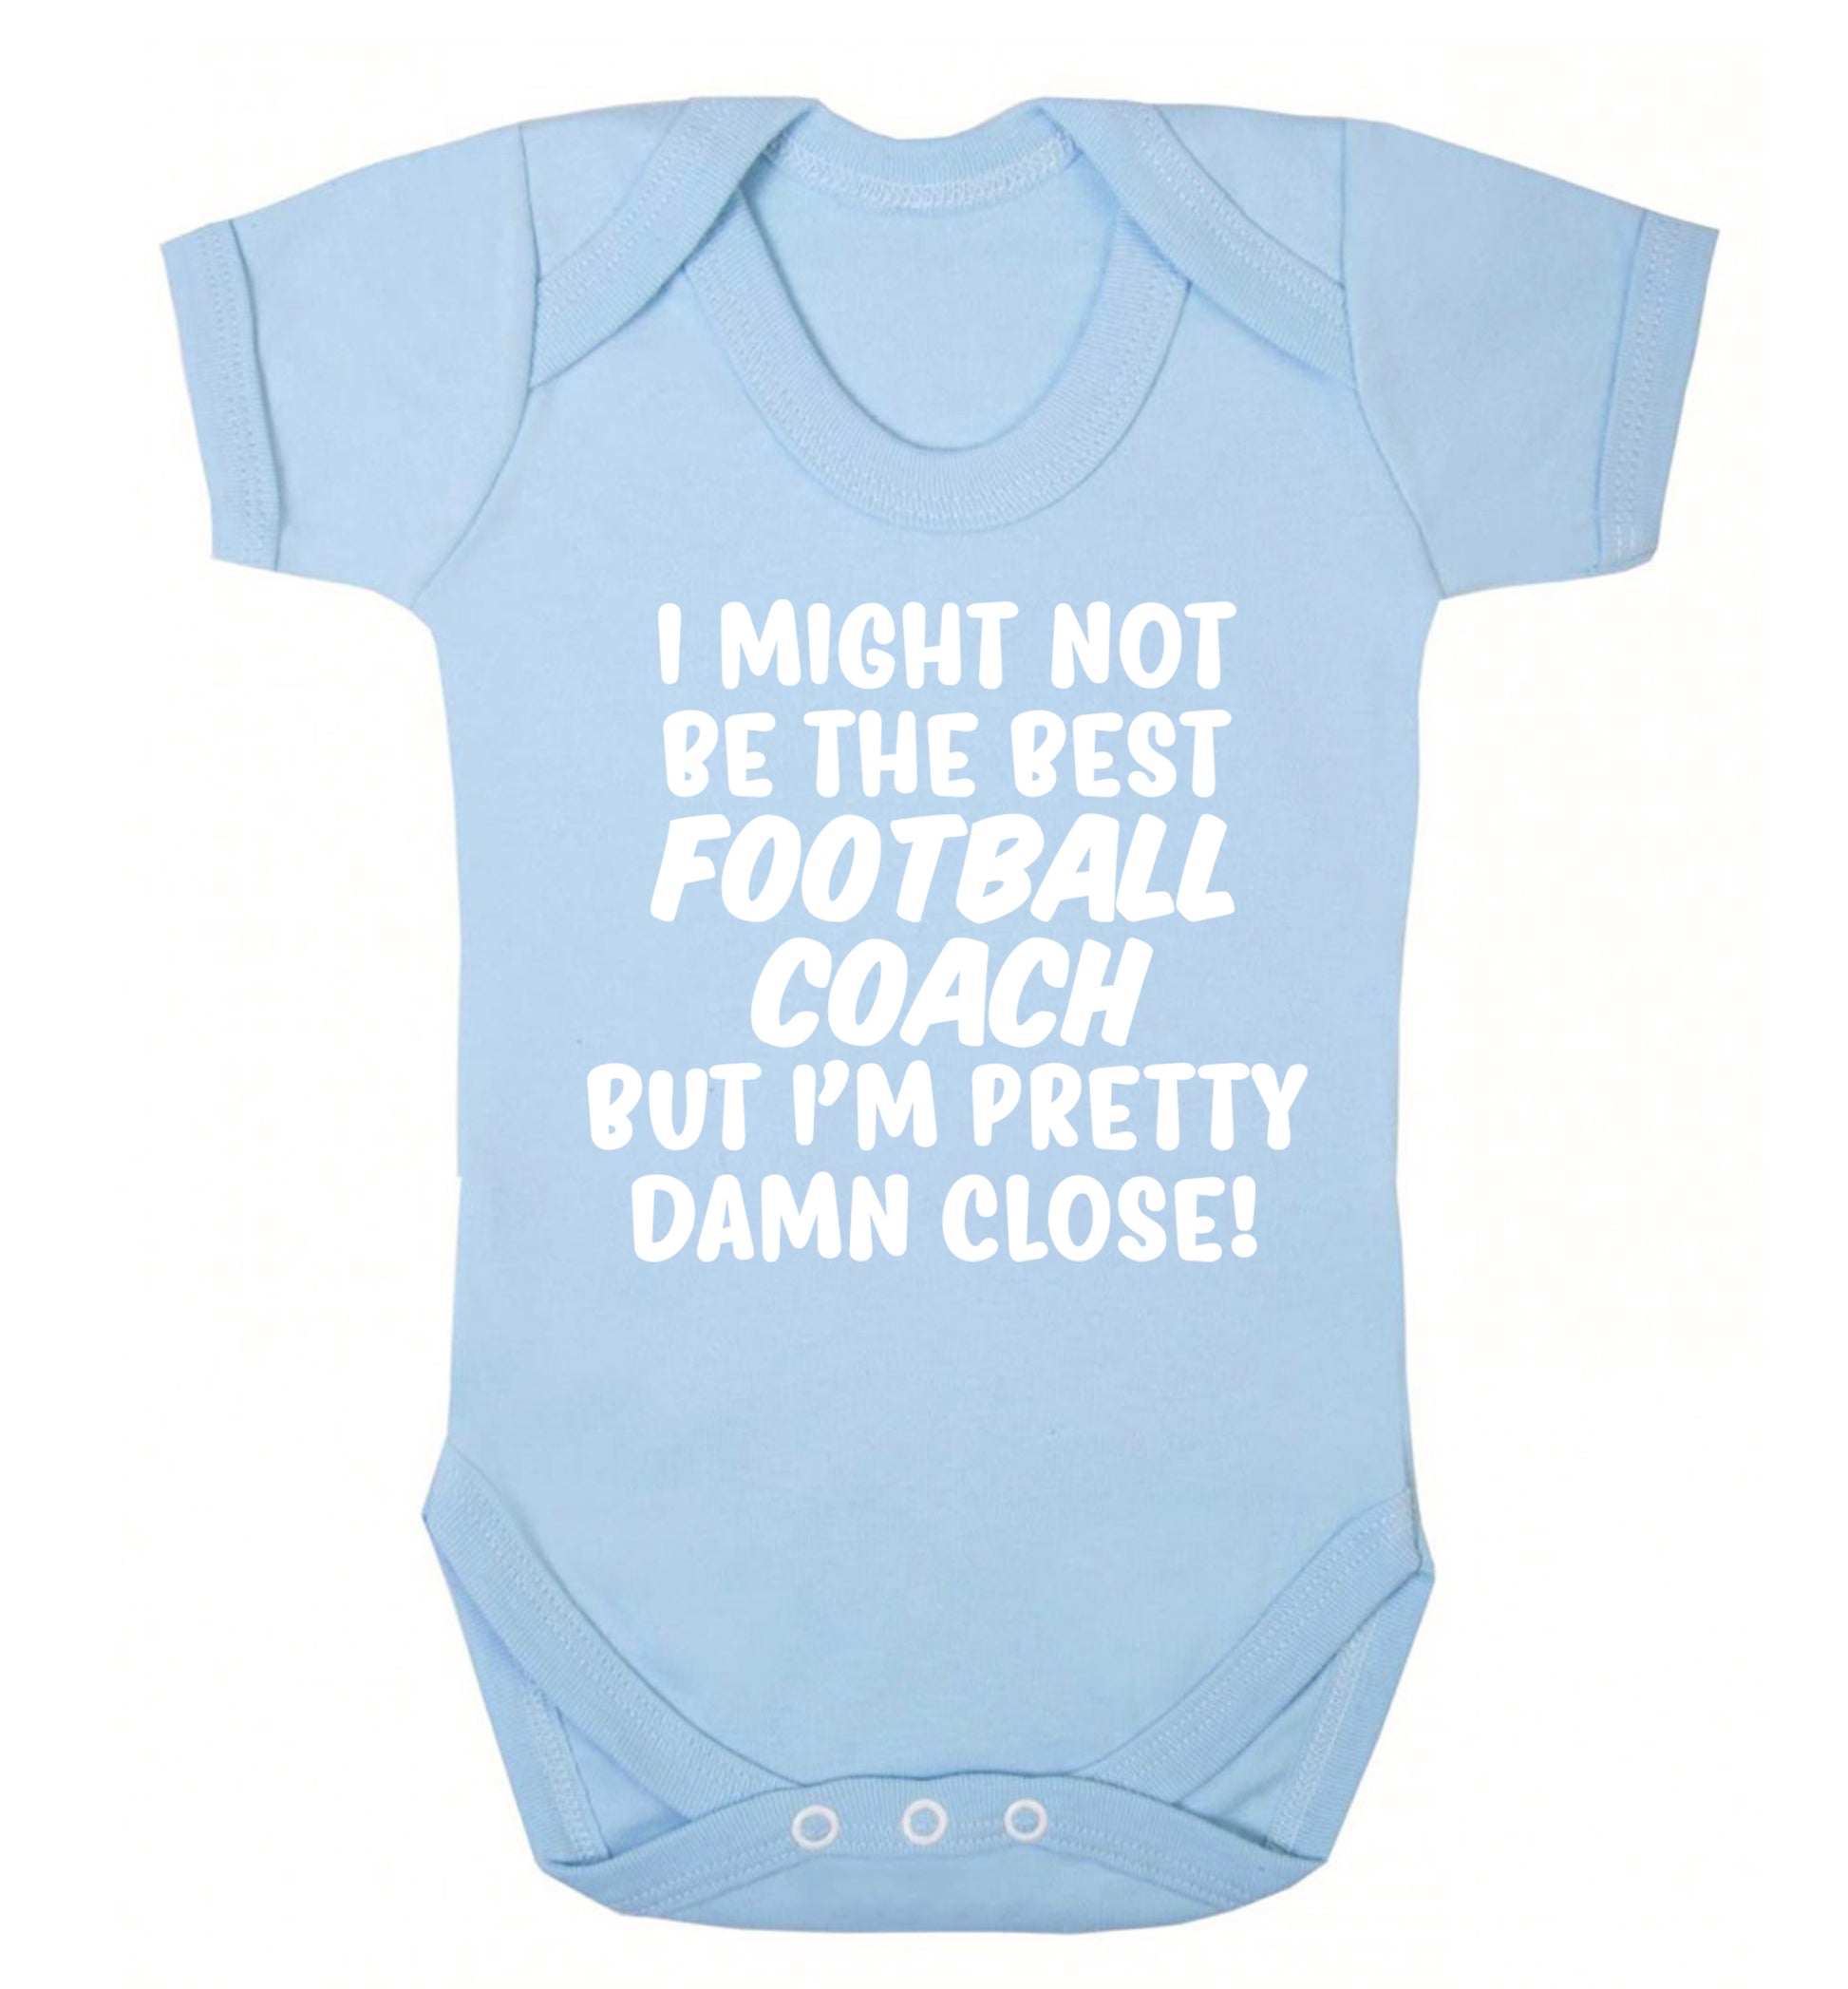 I might not be the best football coach but I'm pretty close! Baby Vest pale blue 18-24 months